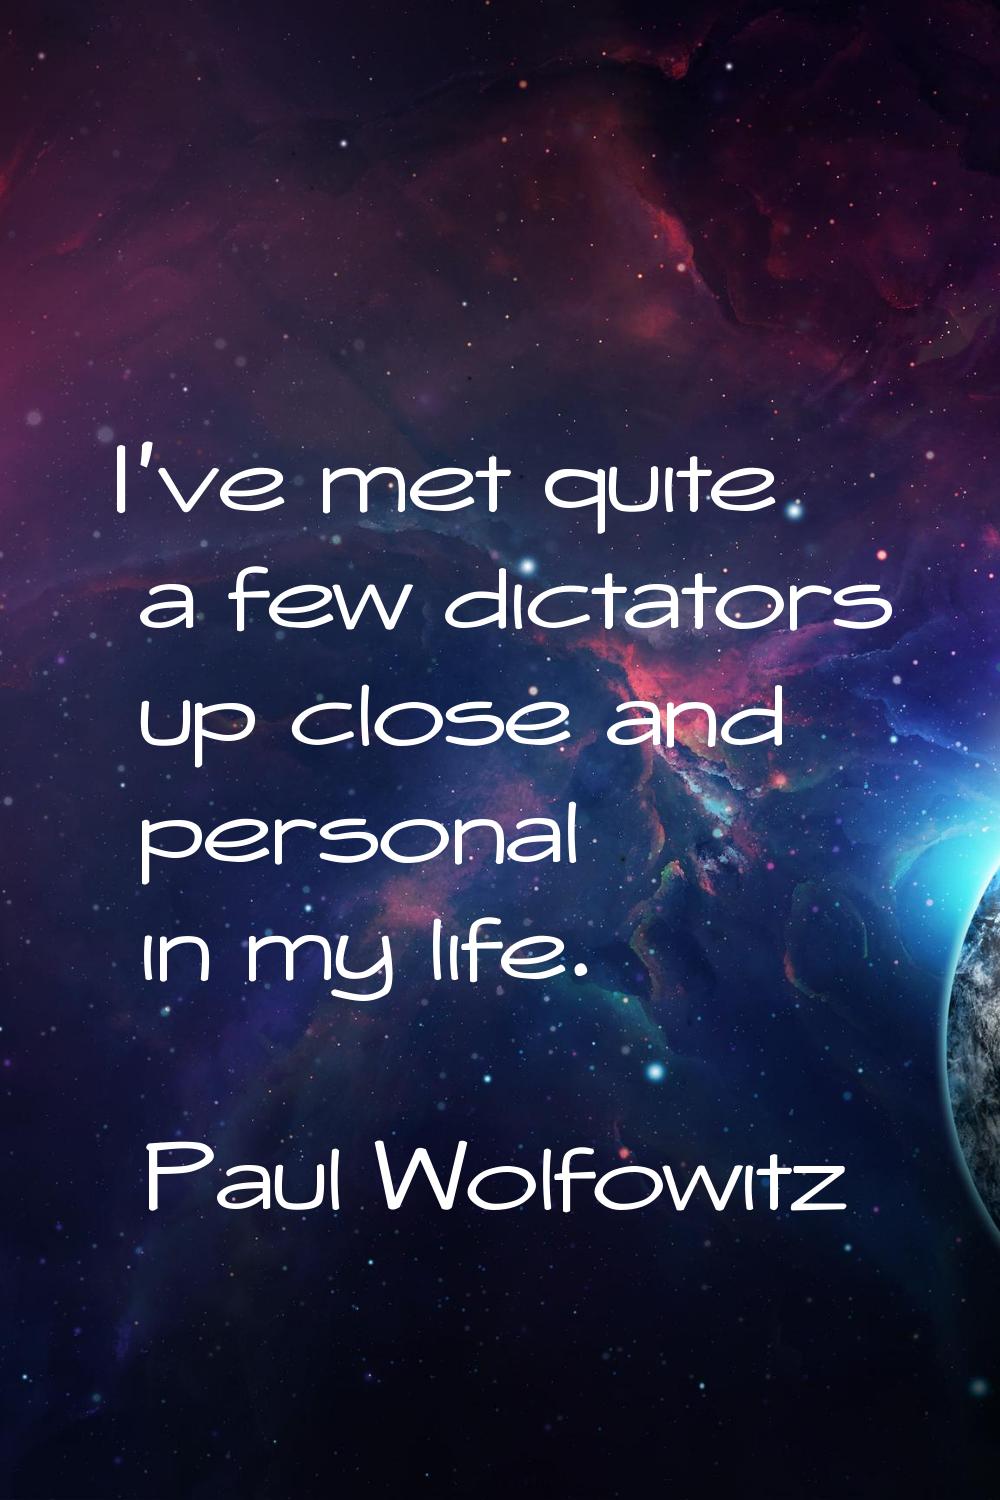 I've met quite a few dictators up close and personal in my life.